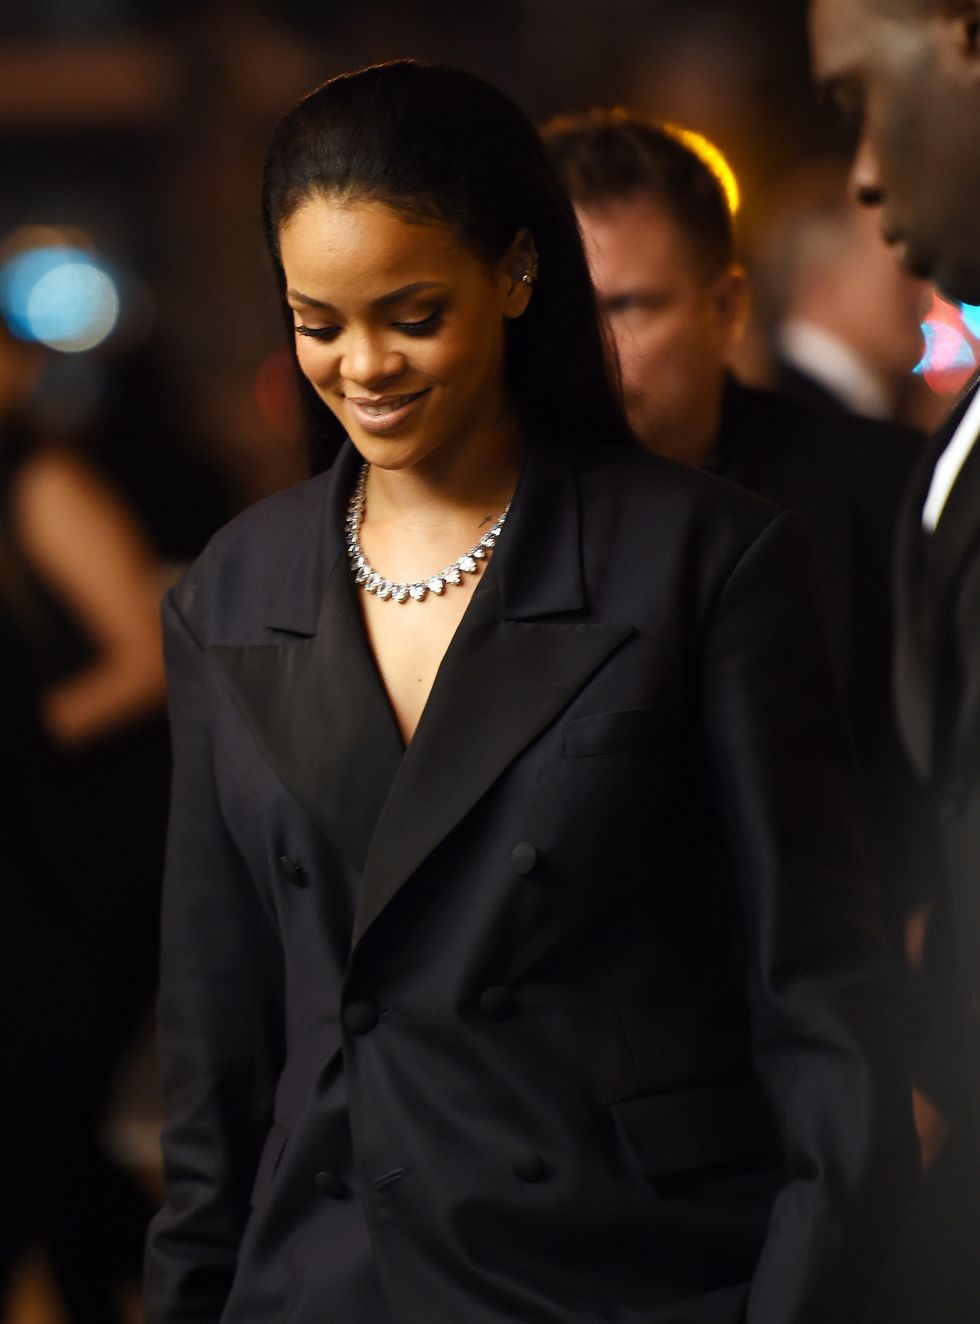 los angeles, ca february 08 singer rihanna arrives at the universal music group post grammy party presented by american airlines and citi at the theatre at ace hotel downtown la on february 8, 2015 in los angeles, california photo by amanda edwardswireimage